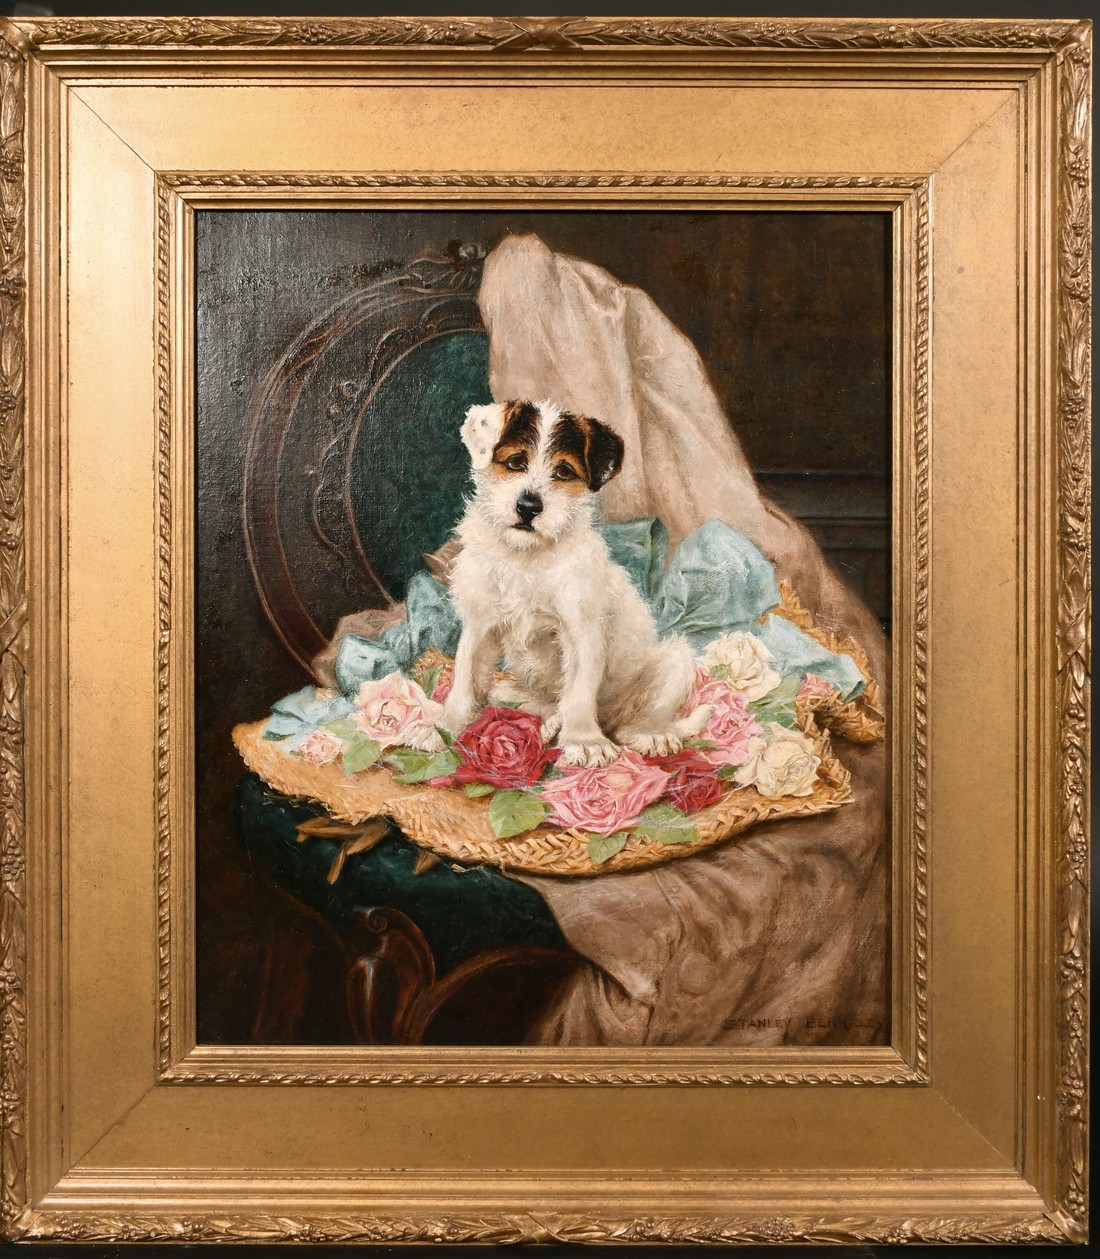 Stanley Barkeley (1855-1909) A portrait of a dog sat amongst roses, oil on canvas, signed, 21" x - Image 2 of 4